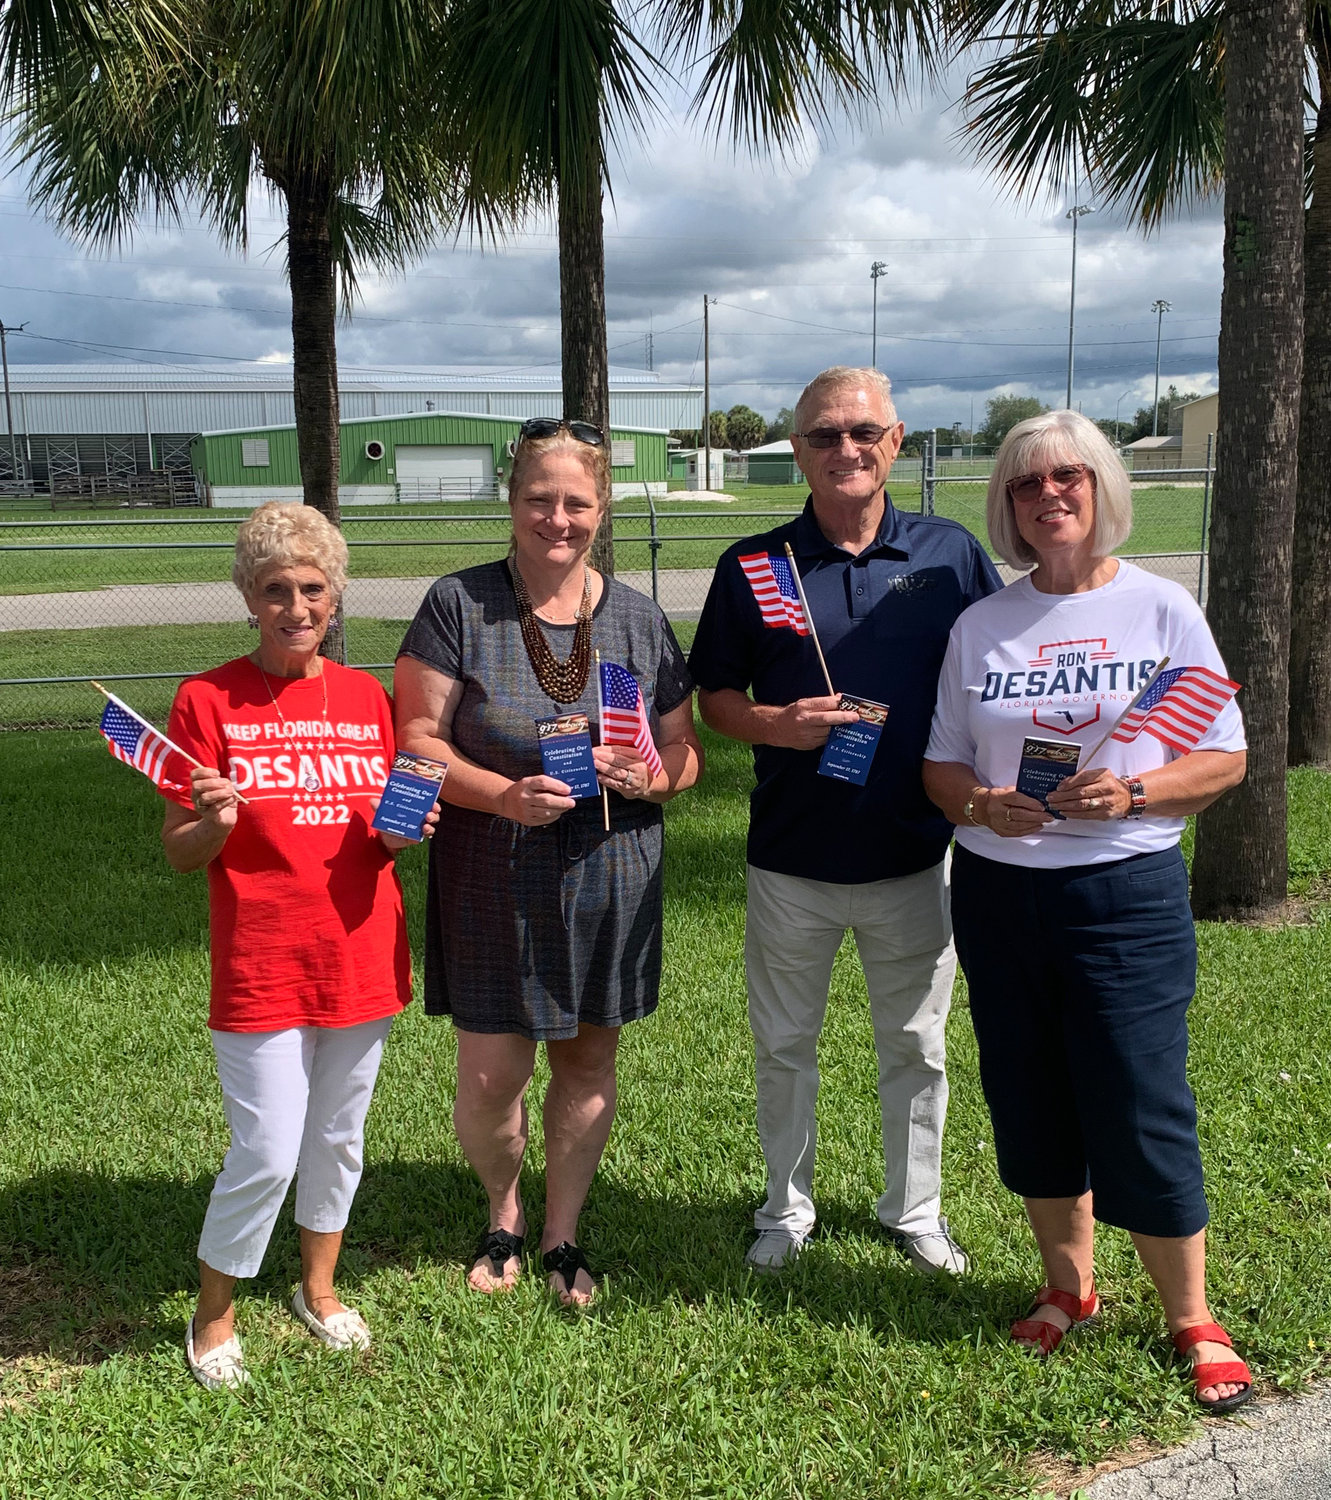 From left to right are Club President Alicia Lachance , School Superintendent  of Glades Schools Dr. Alice Barfield, Okeechobee Republican Chairmanship Jim Craig and Republican Club Vice President Sallie Craig.